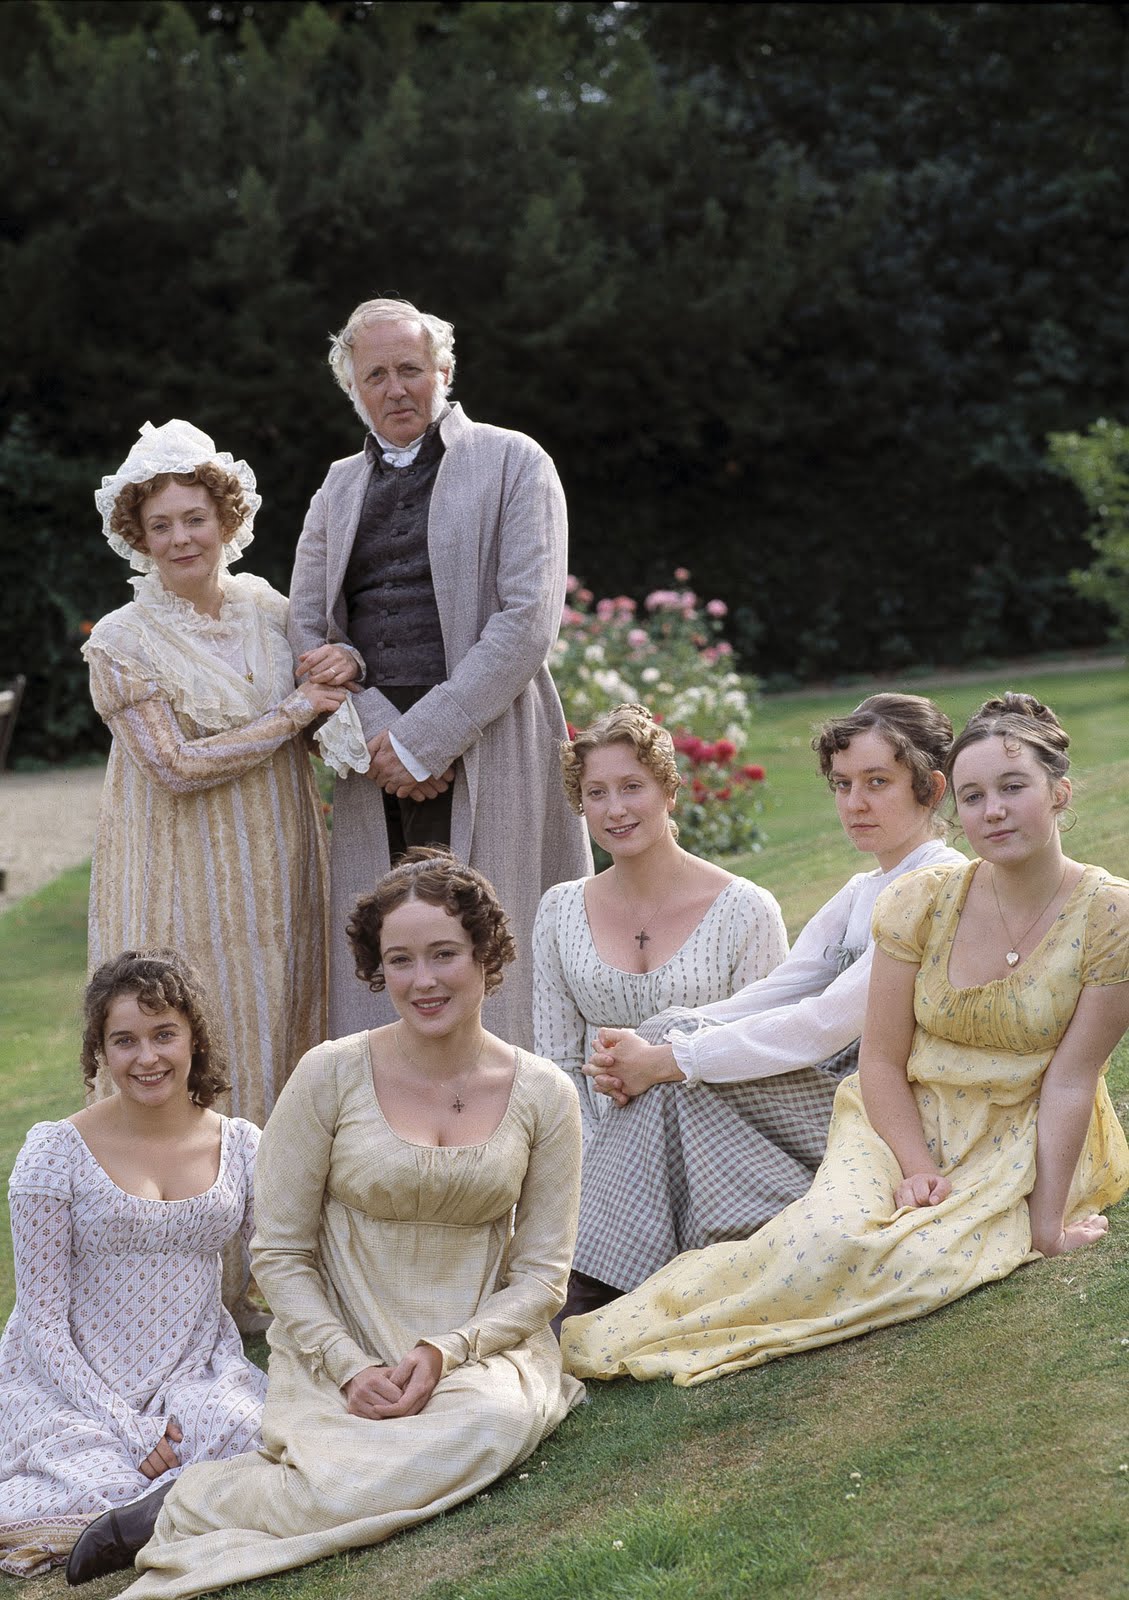 ... the early 19th century England. Colin Firth and Jennifer Ehle starred